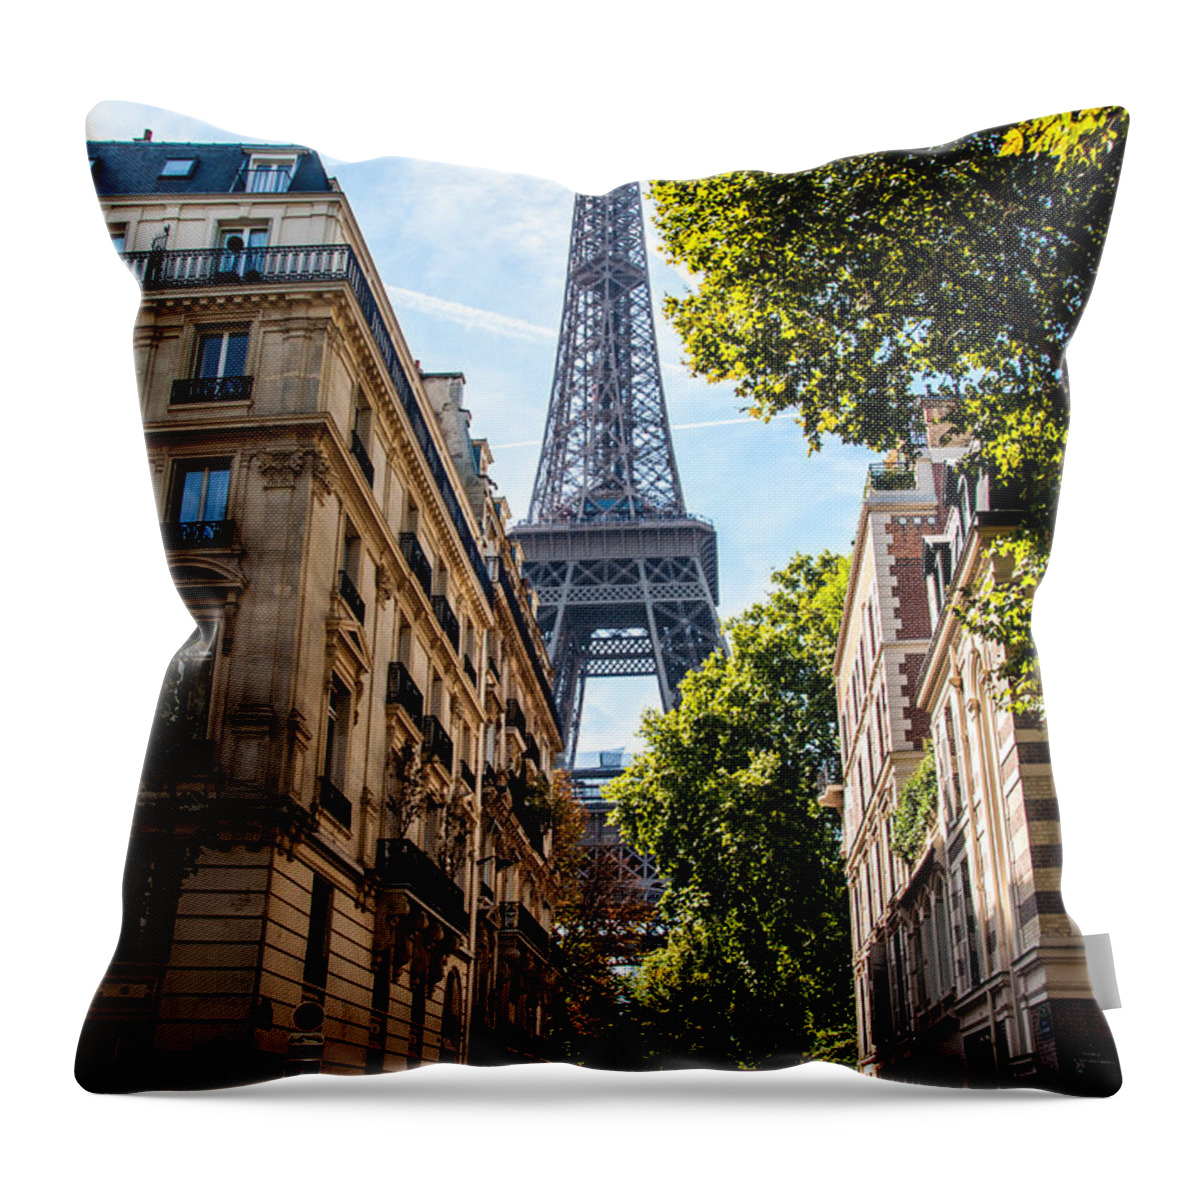 Eiffel Tower Throw Pillow featuring the photograph Eiffel Tower by Lev Kaytsner